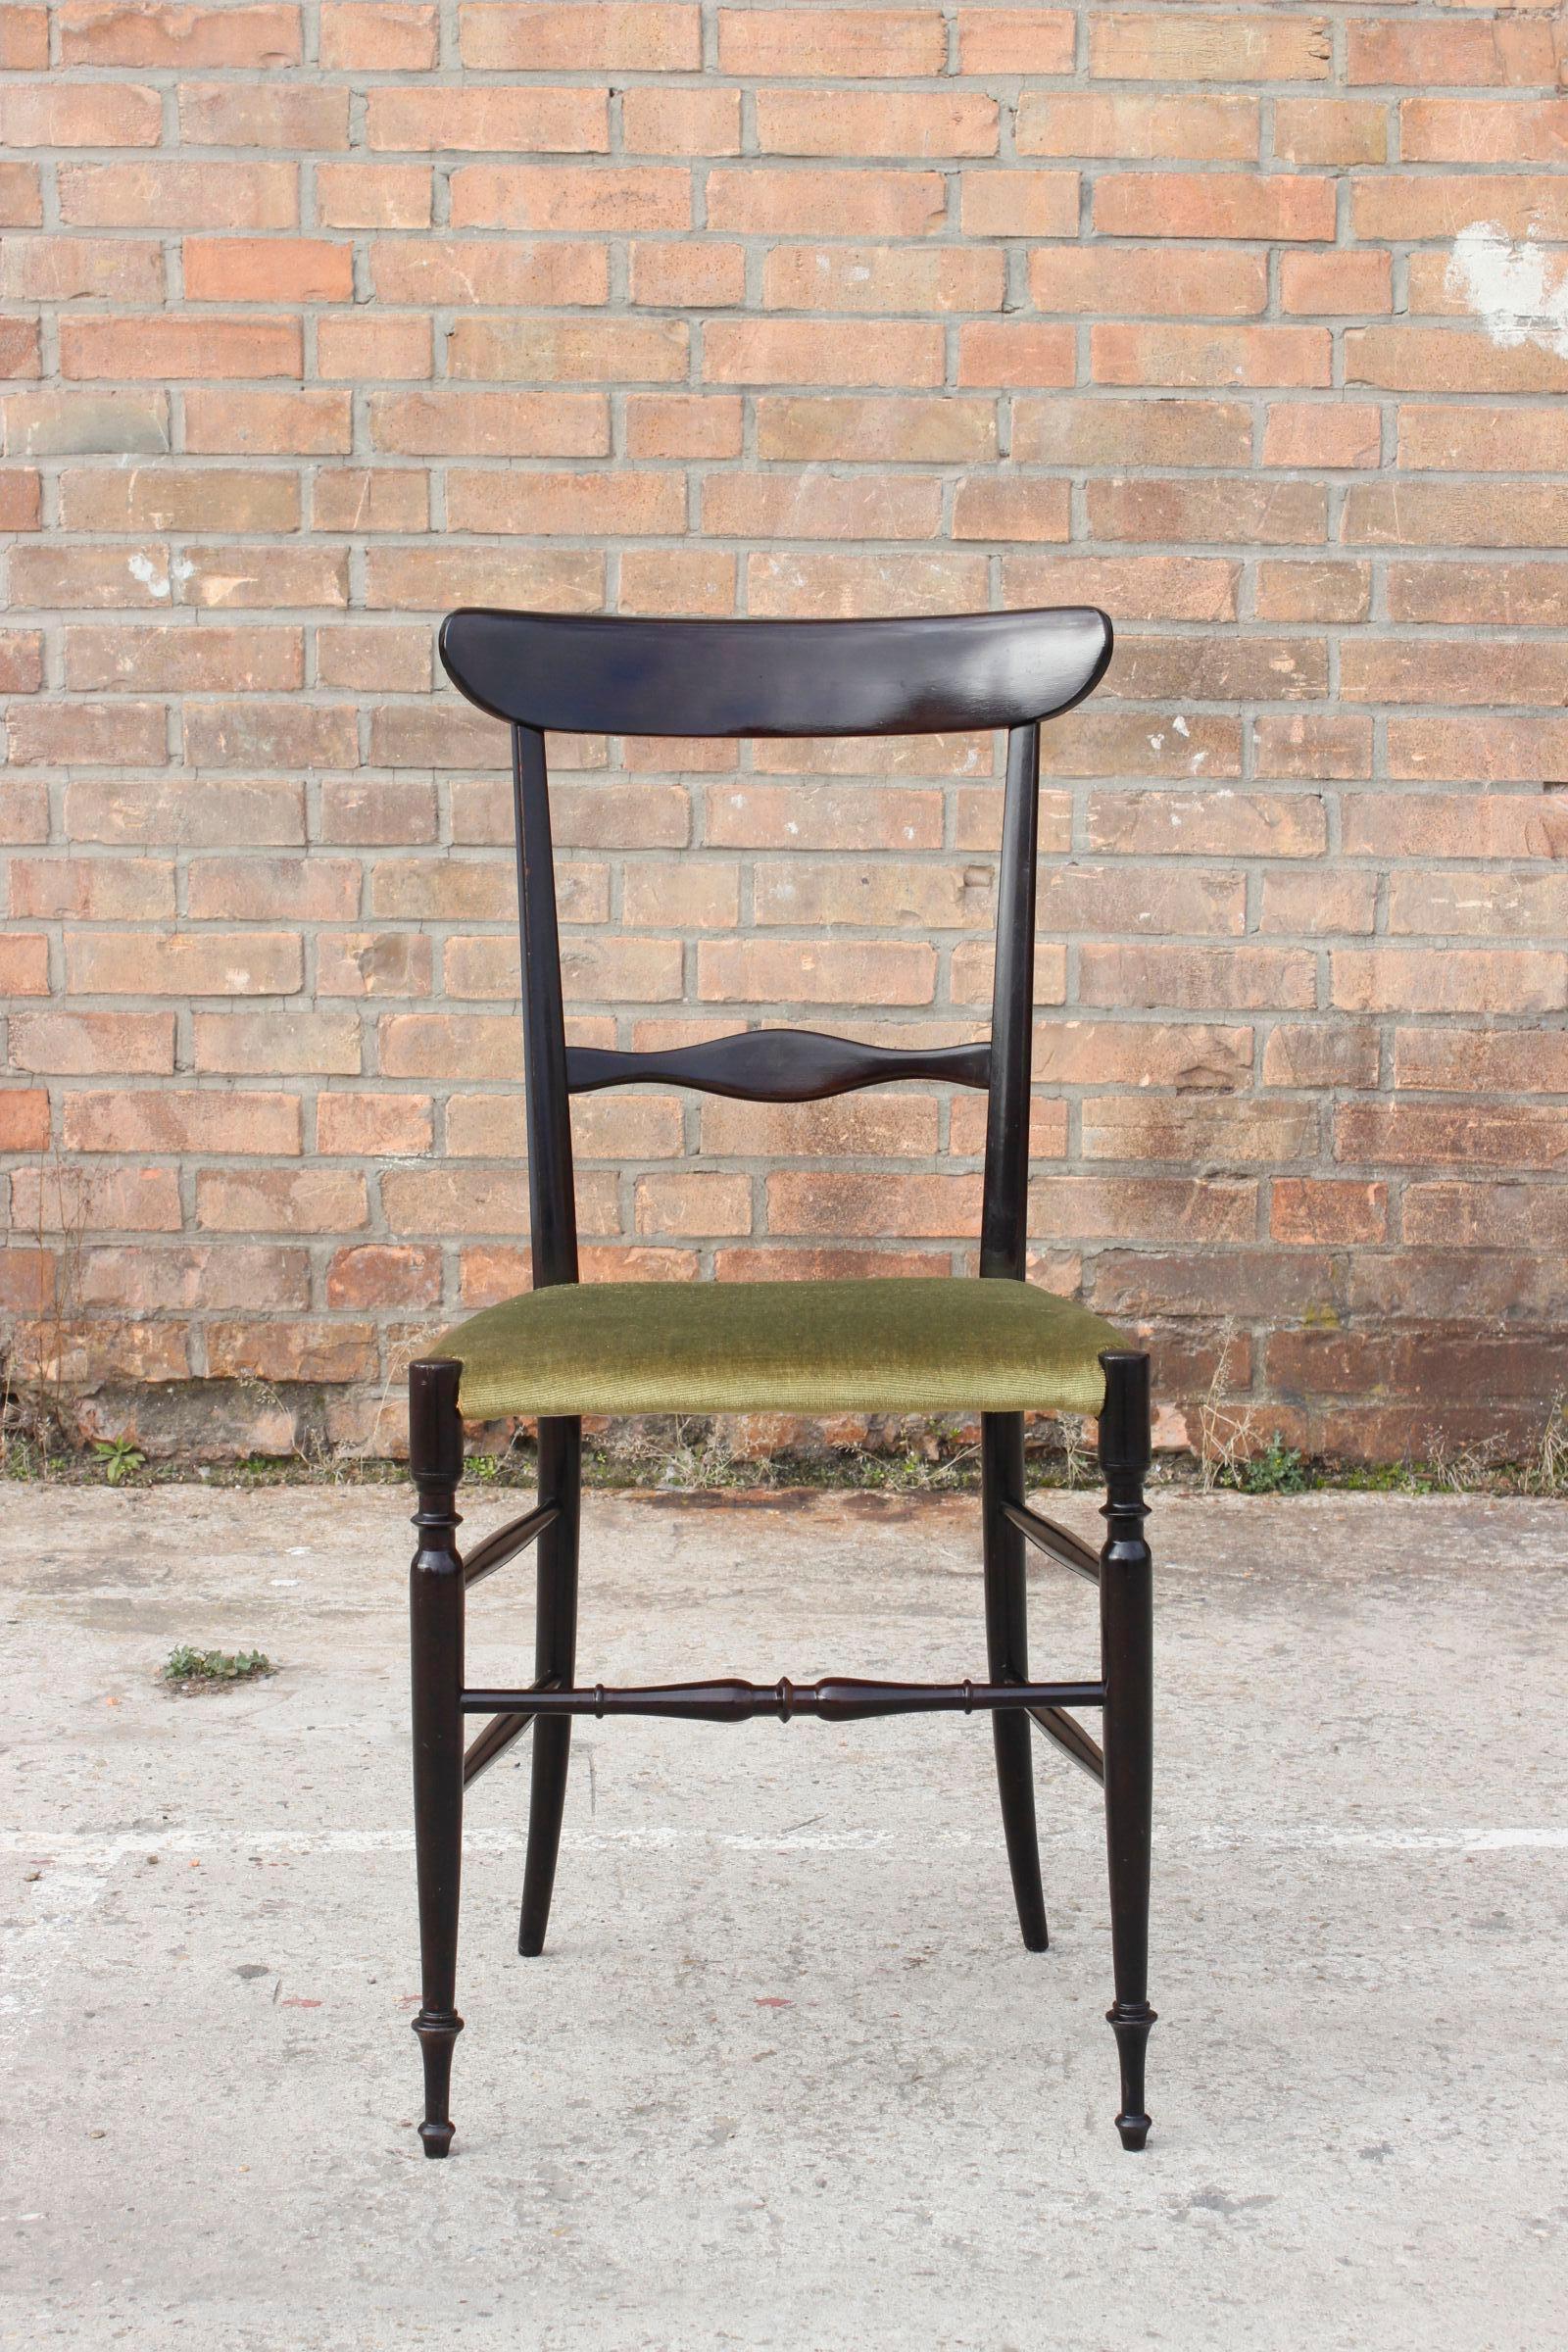 Campanino Chiavari chair in black lacquered walnut, designed by Gaetano Descalzi and produced by Fratelli Levaggi, this edition dates back to the 1950s and has its seating covered with a green fabric. 

In good condition, showing signs of age as the